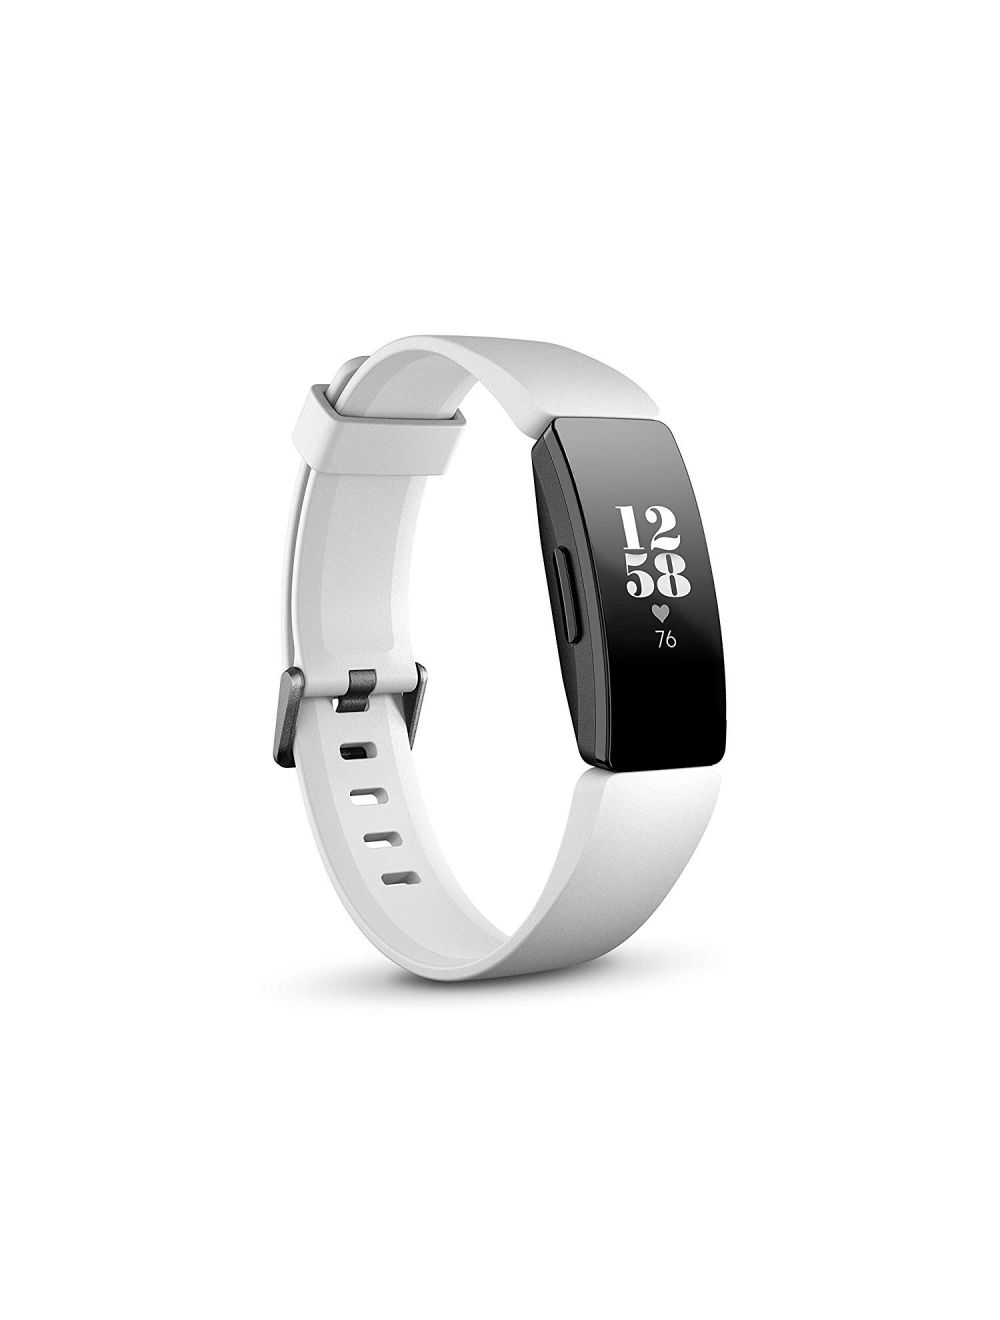 fitbit health 365